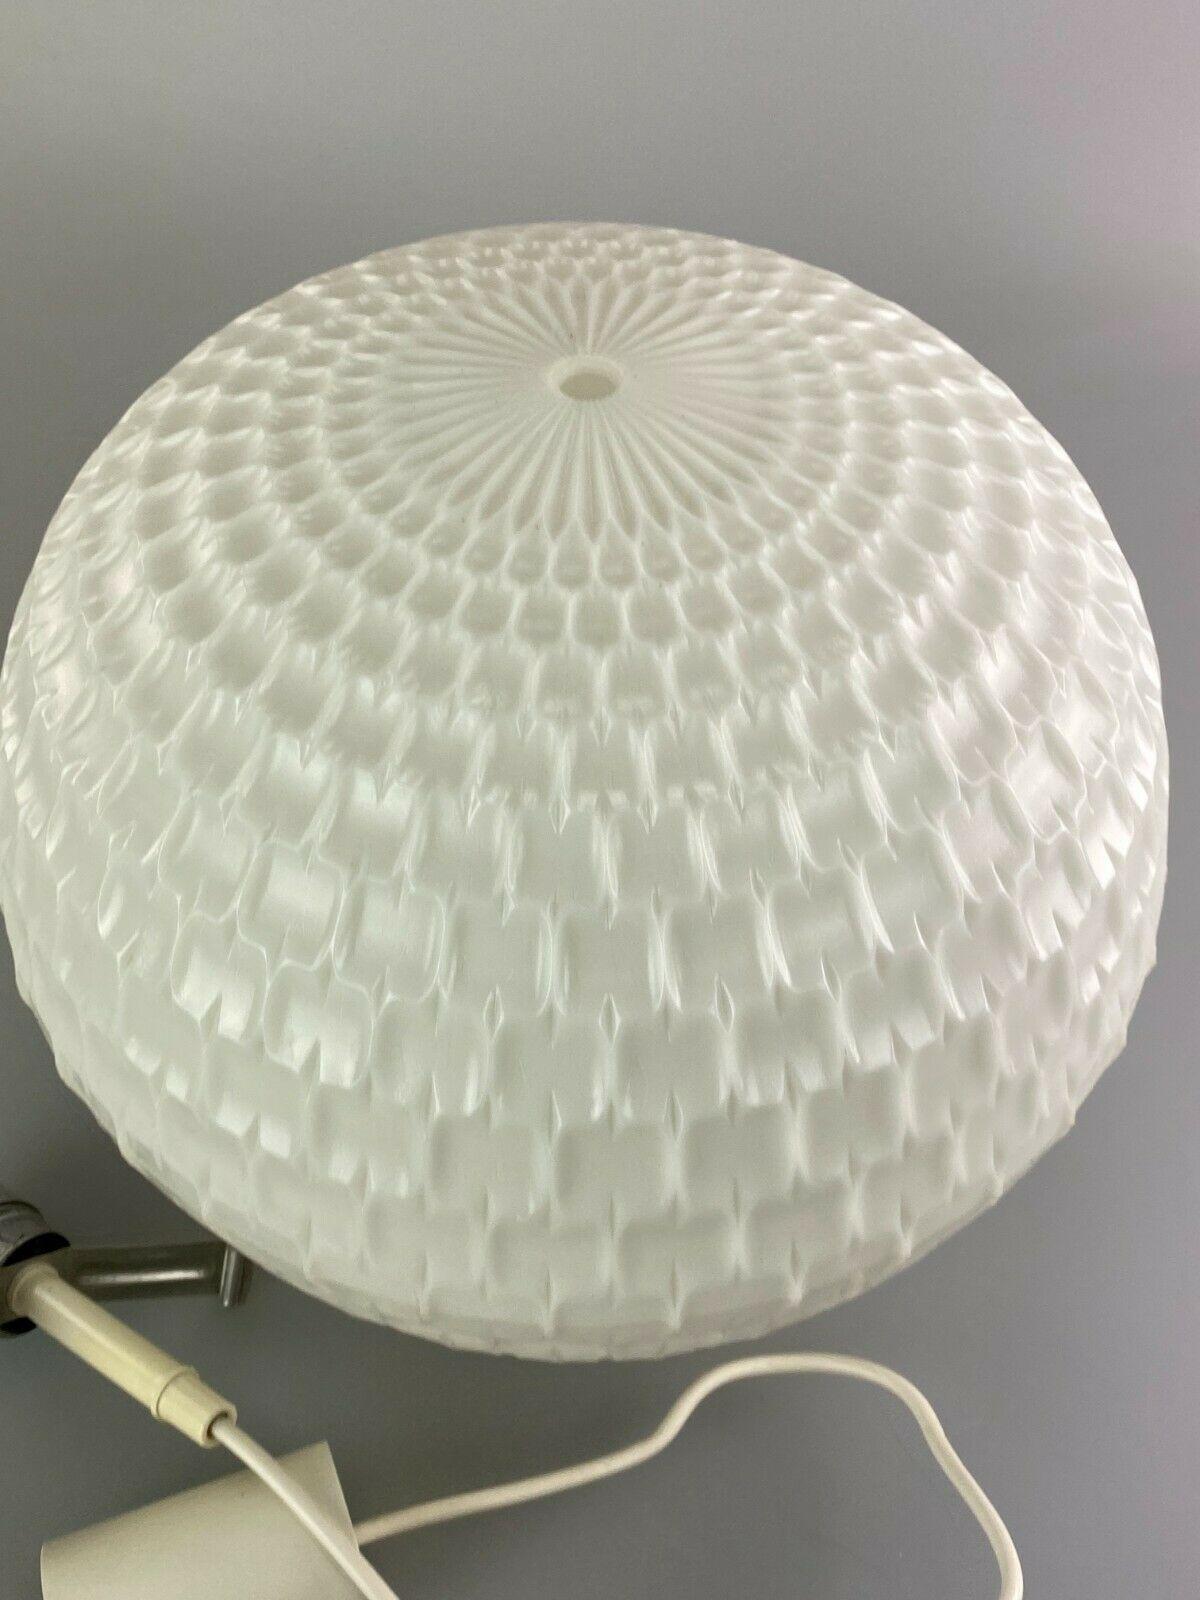 60s 70s Erco Lamp Light Honeycomb Ceiling Lamp Plastic Space Age Design For Sale 4